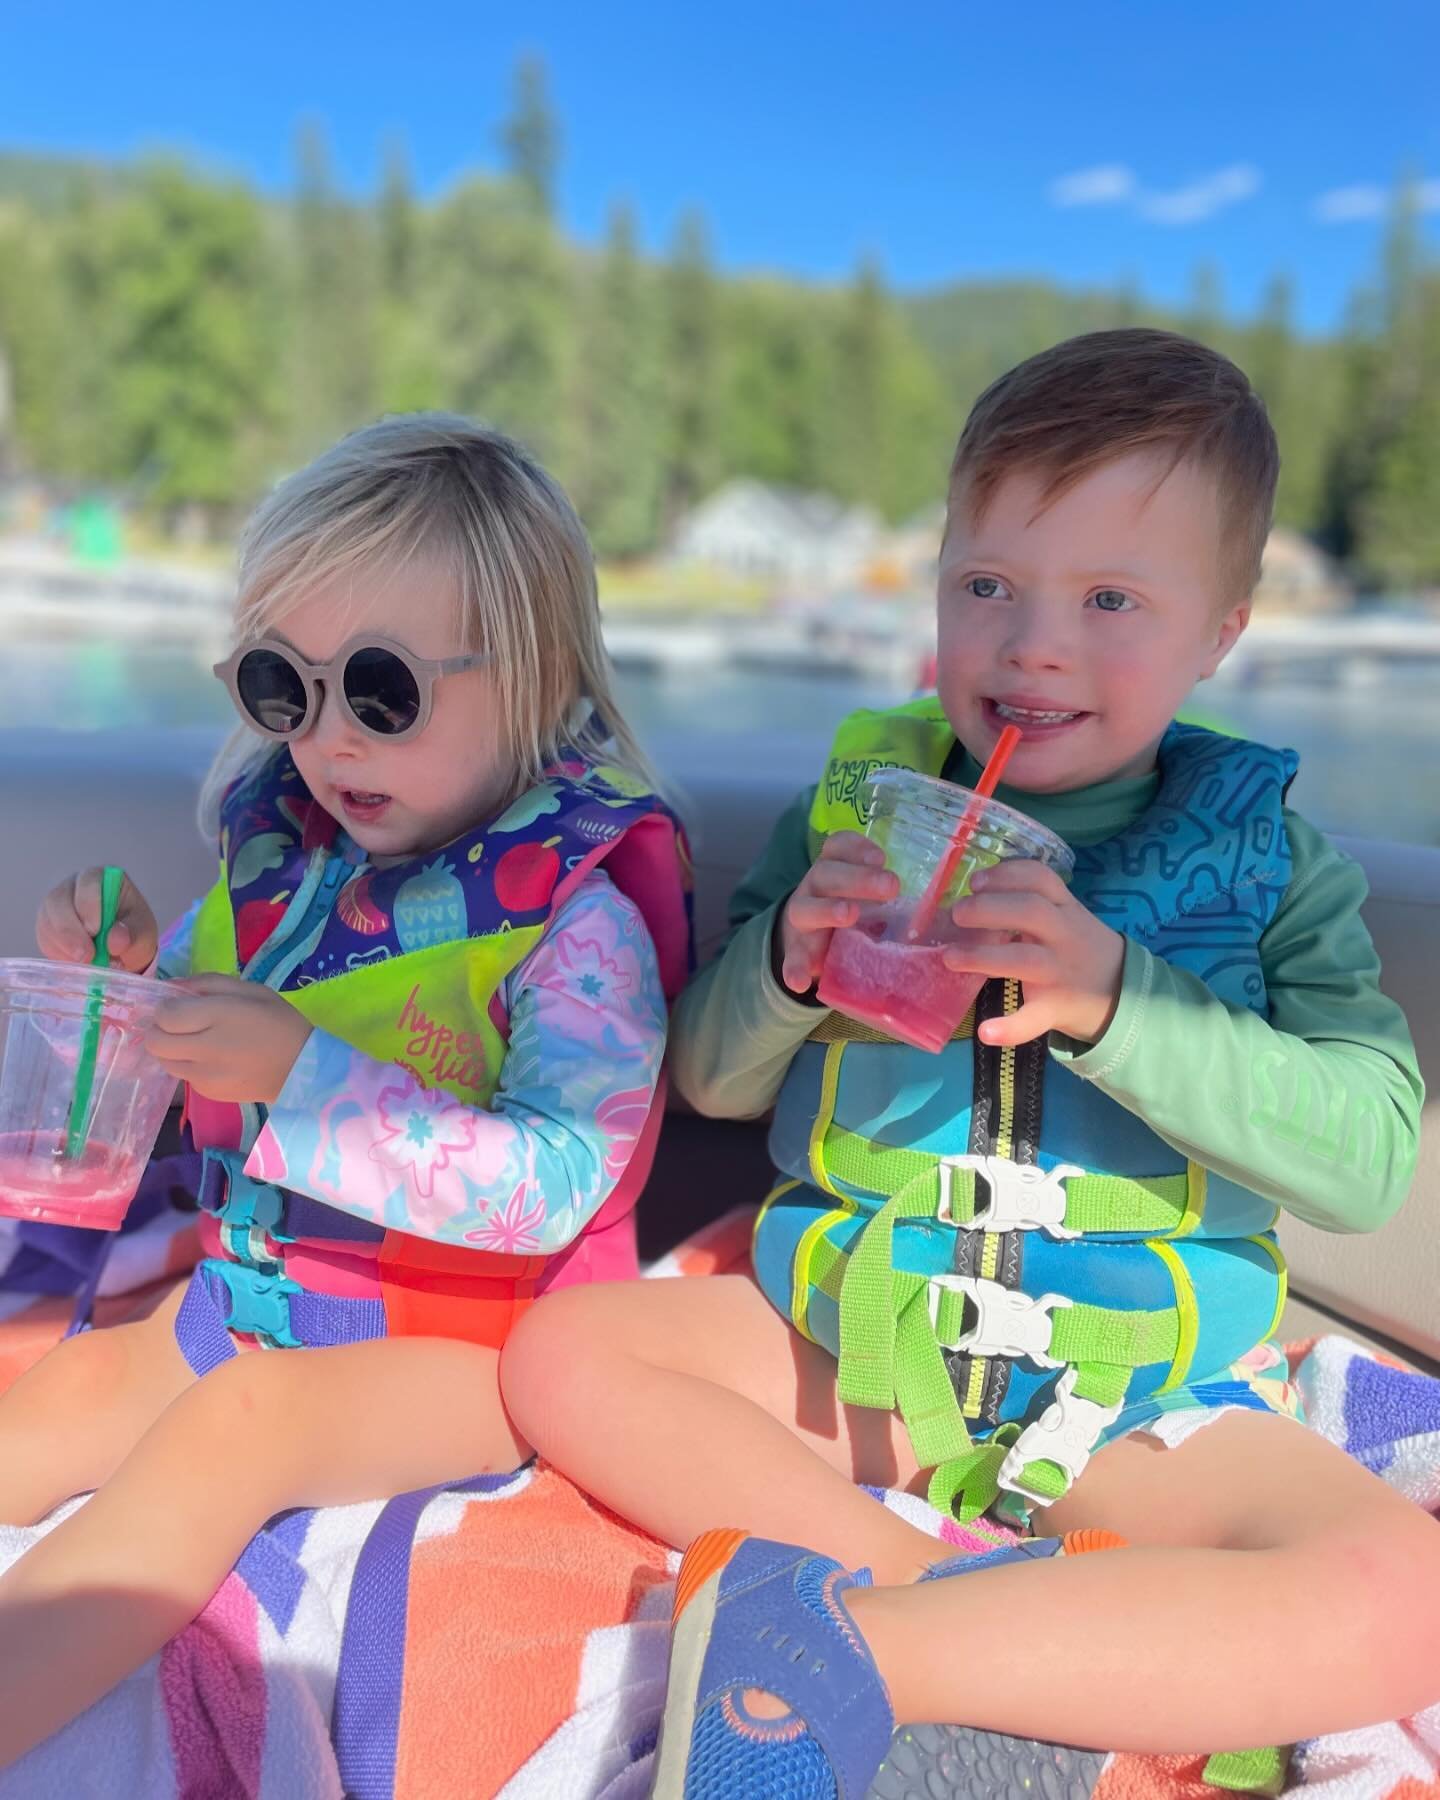 As summer quickly approaches, the kids can&rsquo;t stop talking about tubing, boat rides, swimming, and indulging in &ldquo;smoofees&rdquo; (aka huckleberry daiquiris) from Cavs! They&rsquo;re growing so fast, and I&rsquo;m excited to establish new s